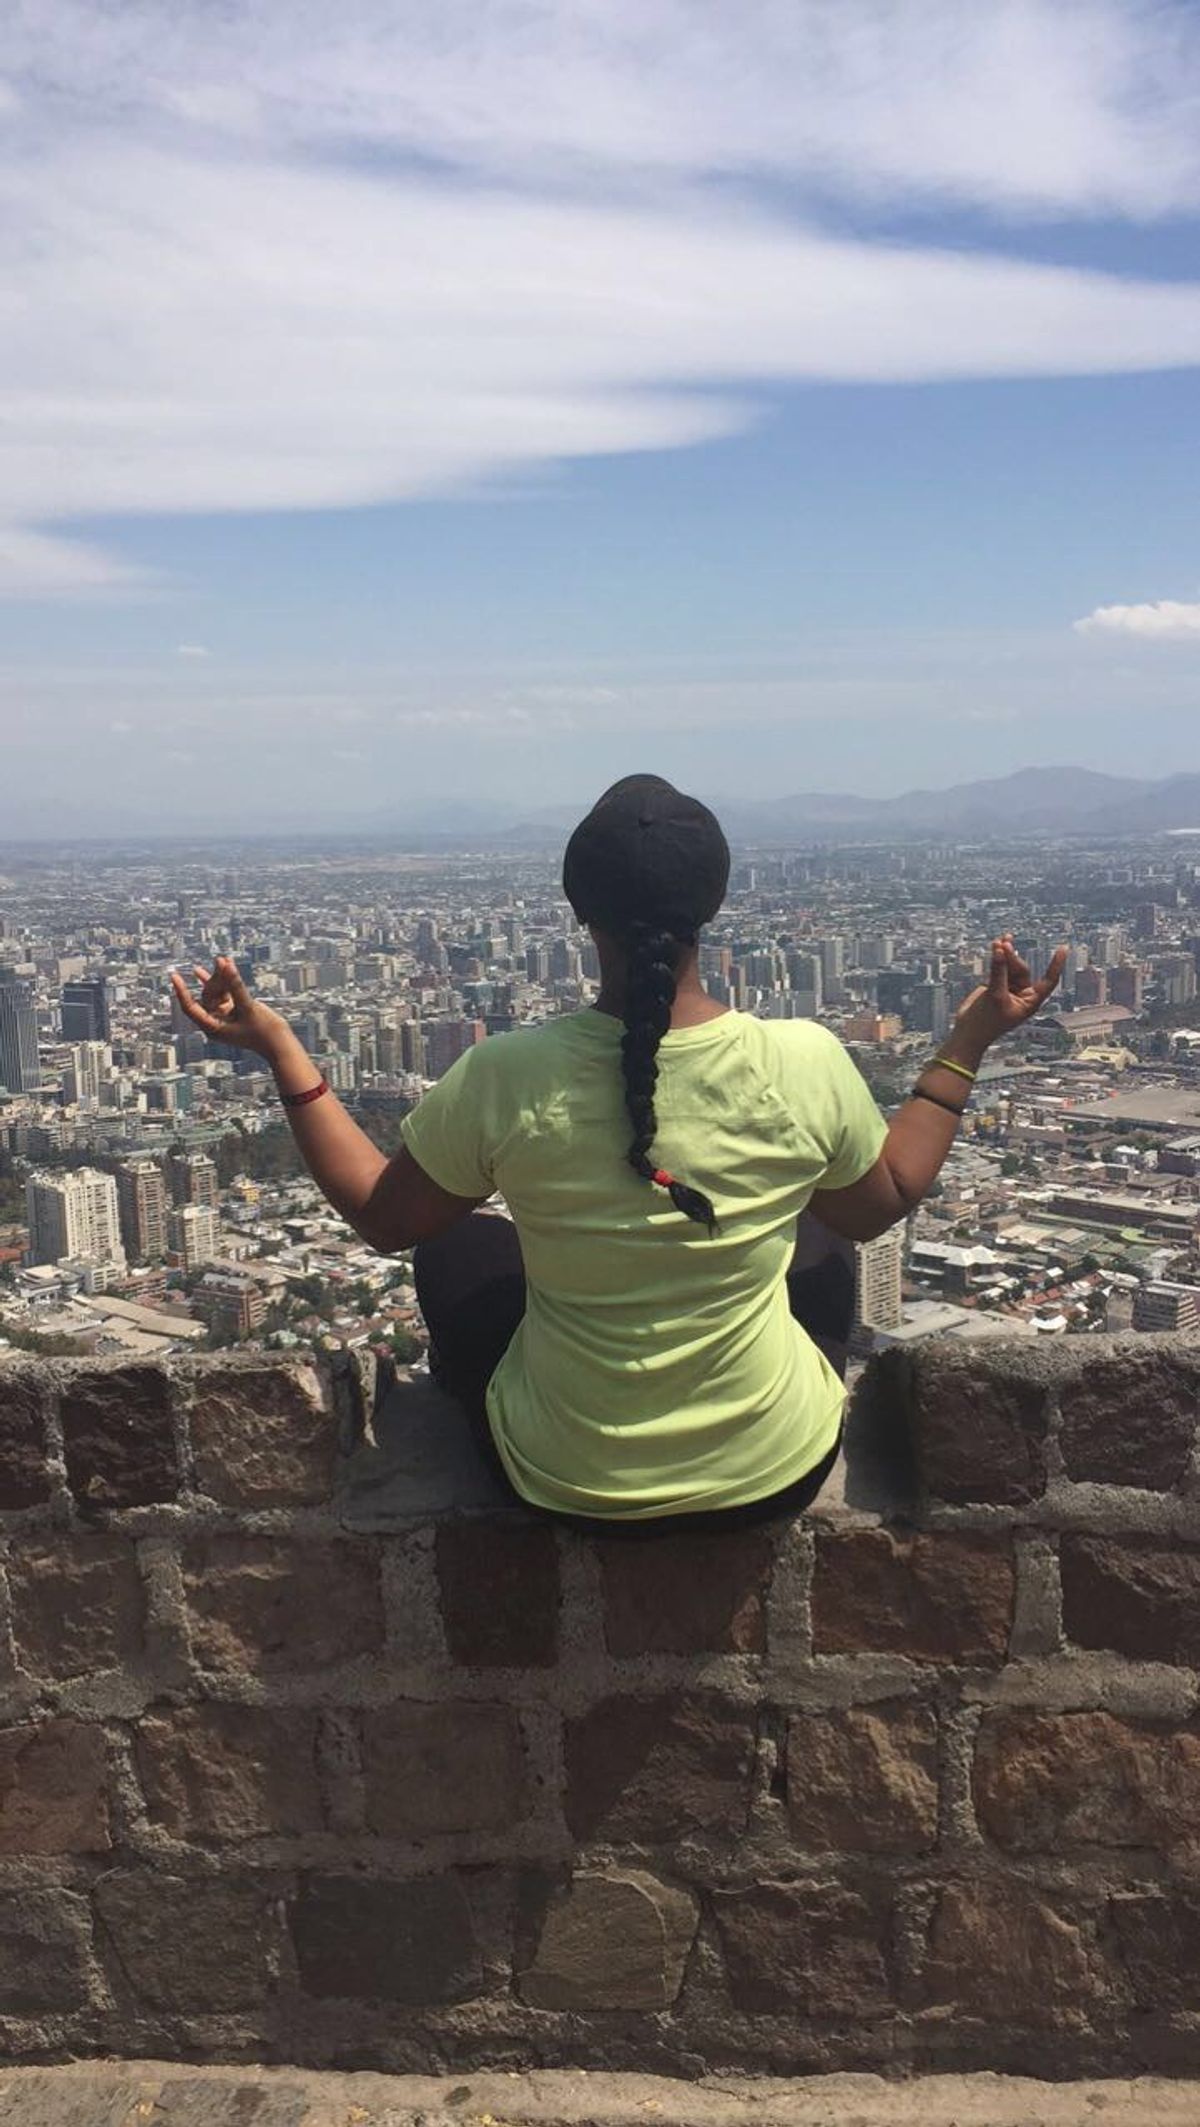 The Struggles With Black Identity While Abroad